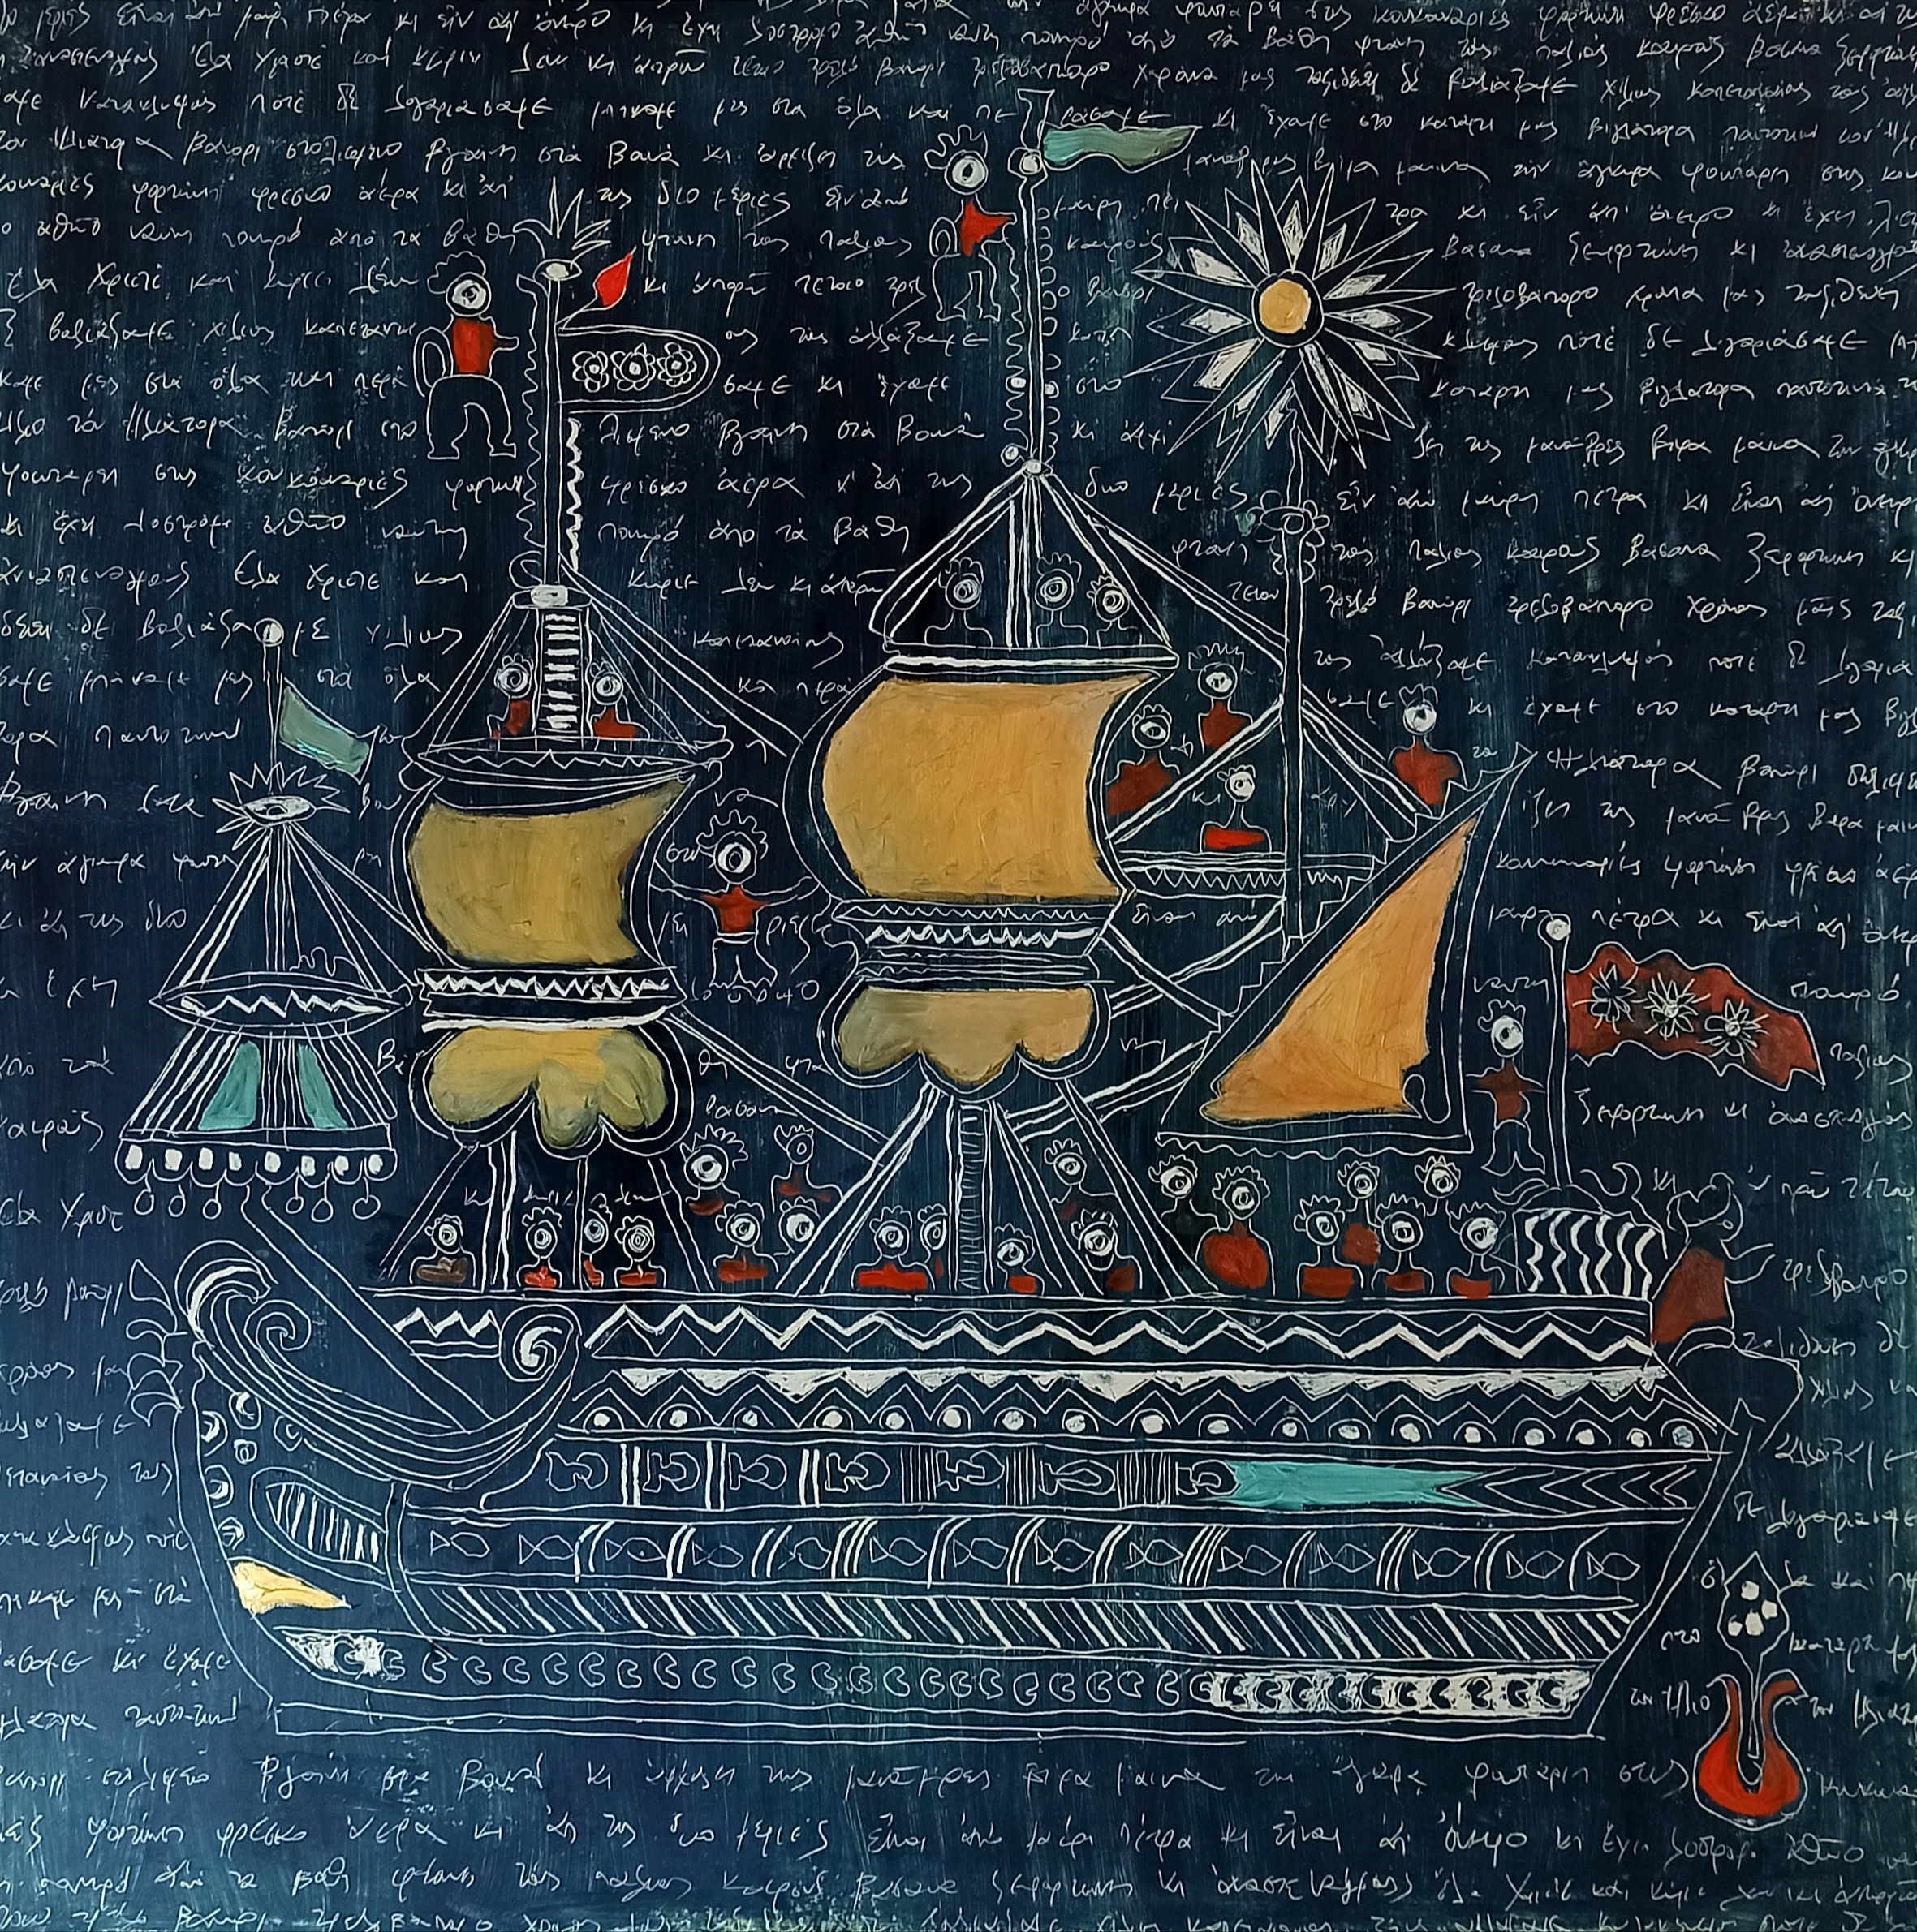 61.THE SHIP, REFERENCE TO O.ELITIS, 70X70, MIXED MEDIA ON CARDBOARD, 900 EURO